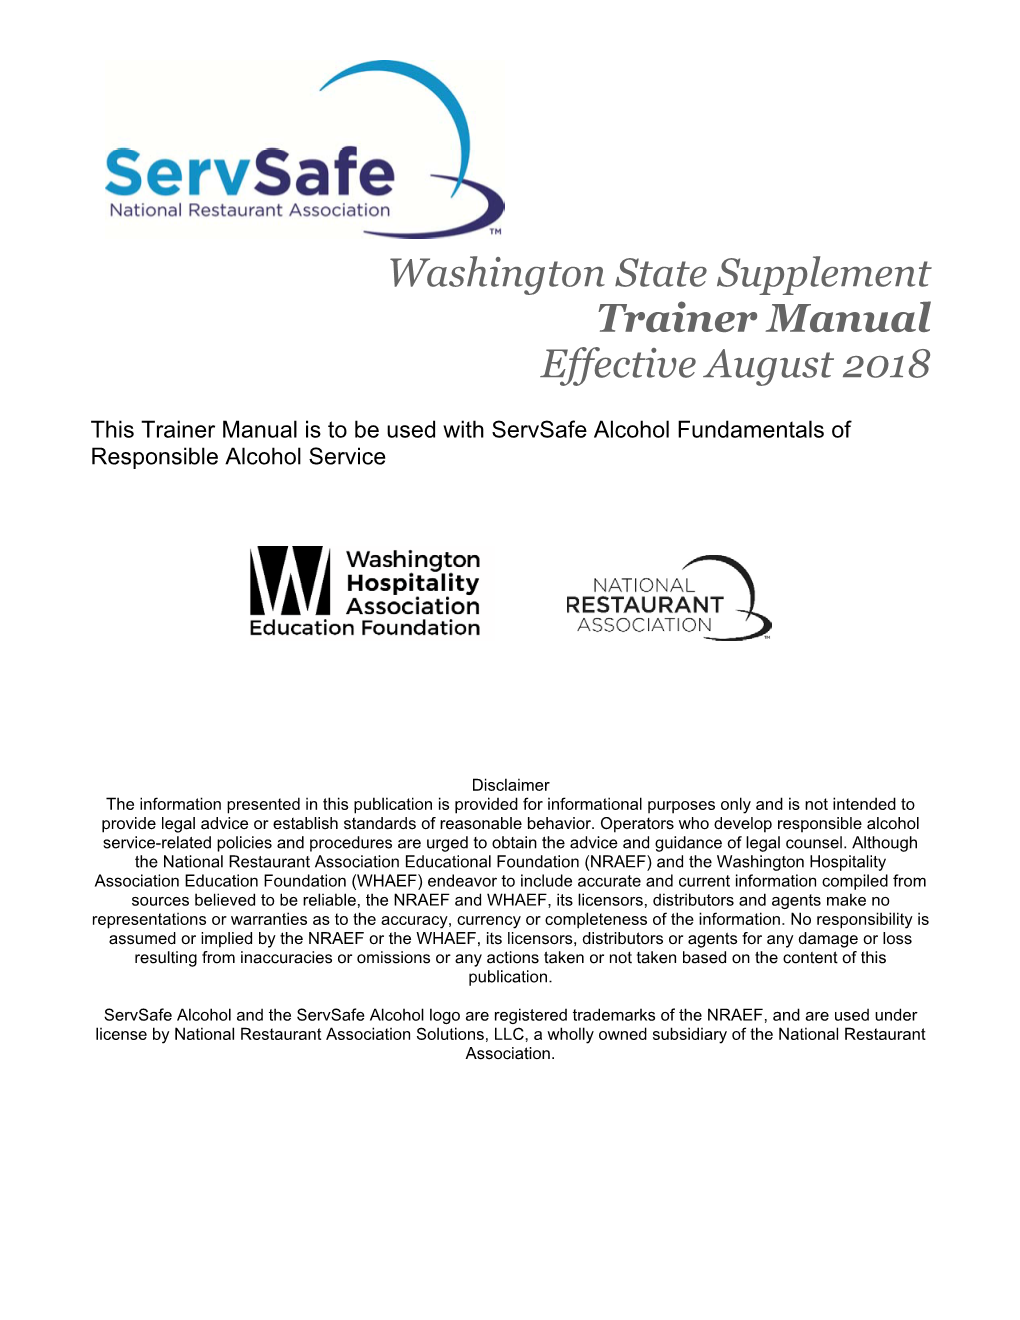 Washington State Supplement Trainer Manual Effective August 2018